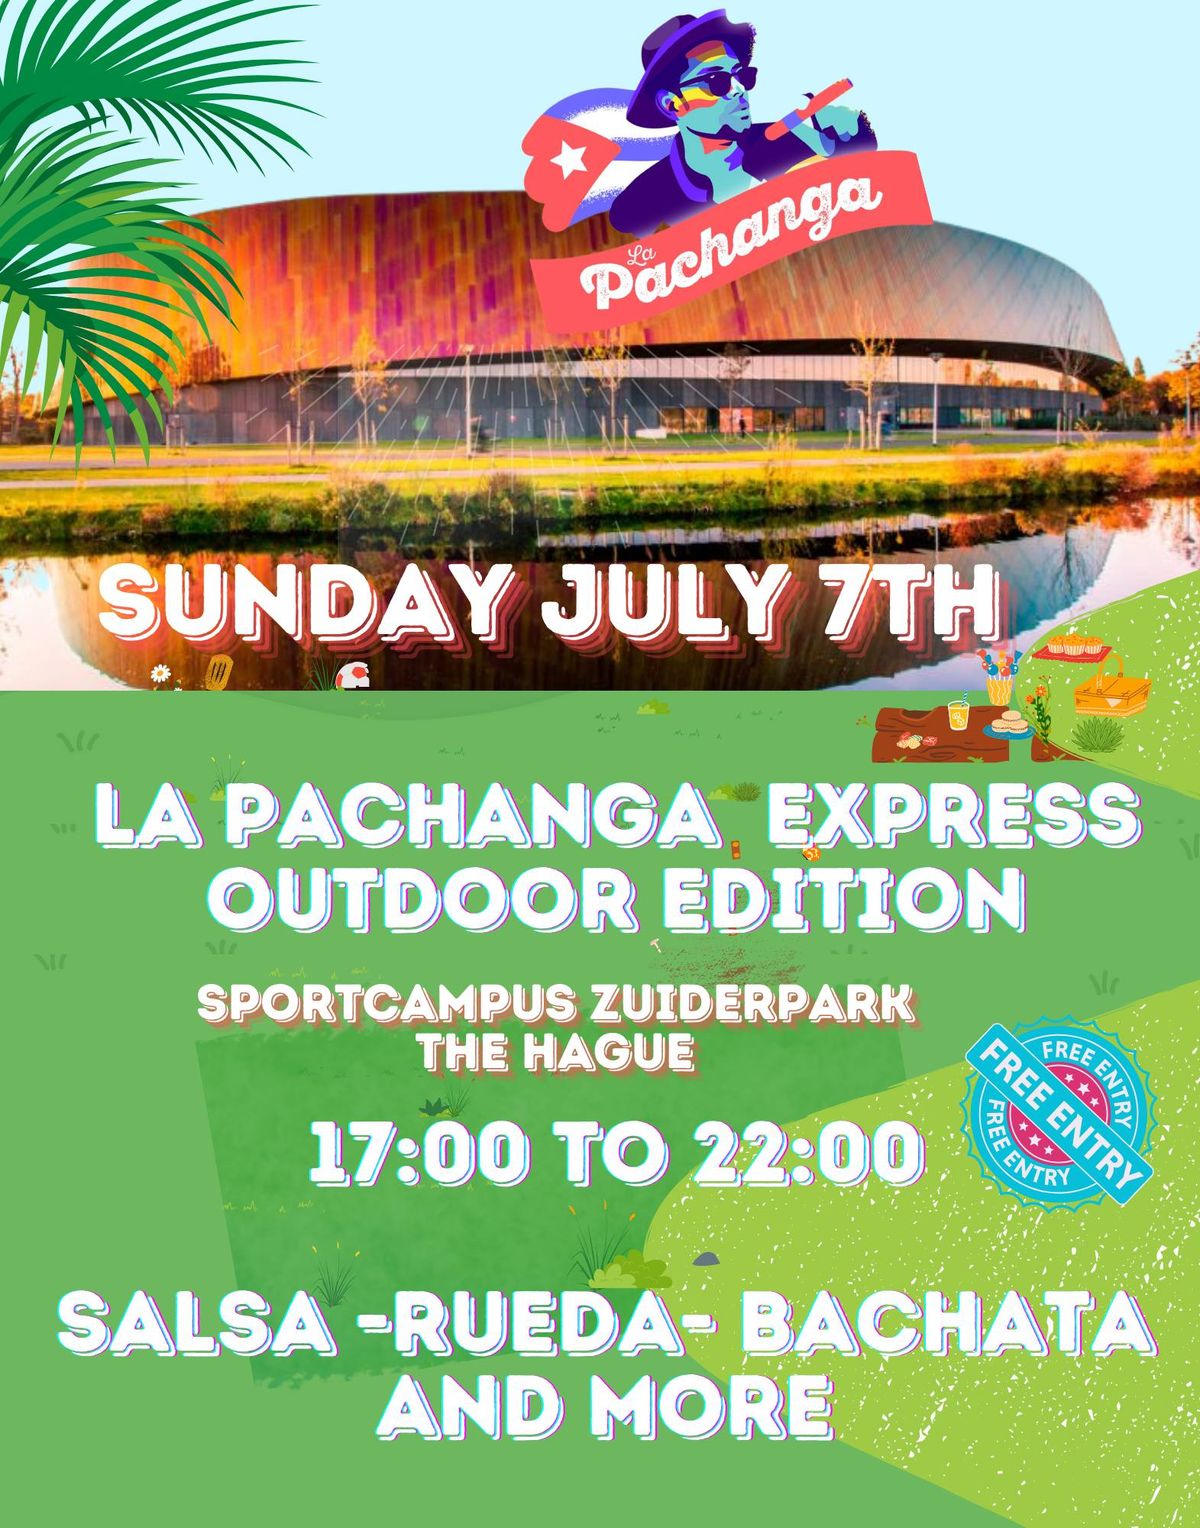 La Pachanga Salsa & Bachat Party Express Outdoor Edition